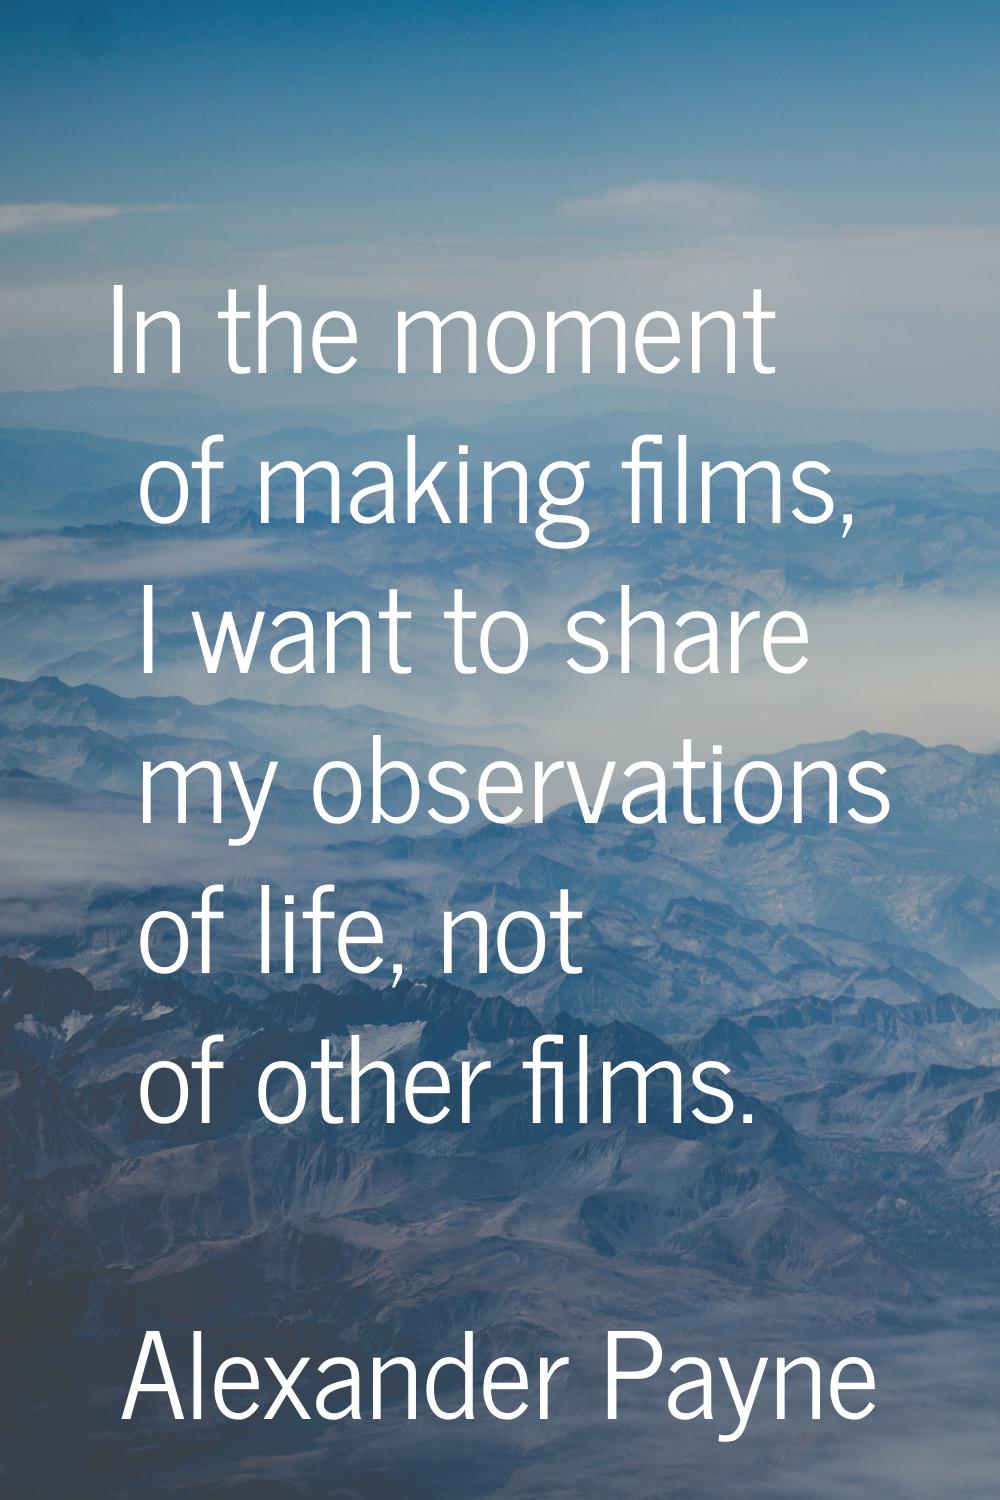 In the moment of making films, I want to share my observations of life, not of other films.